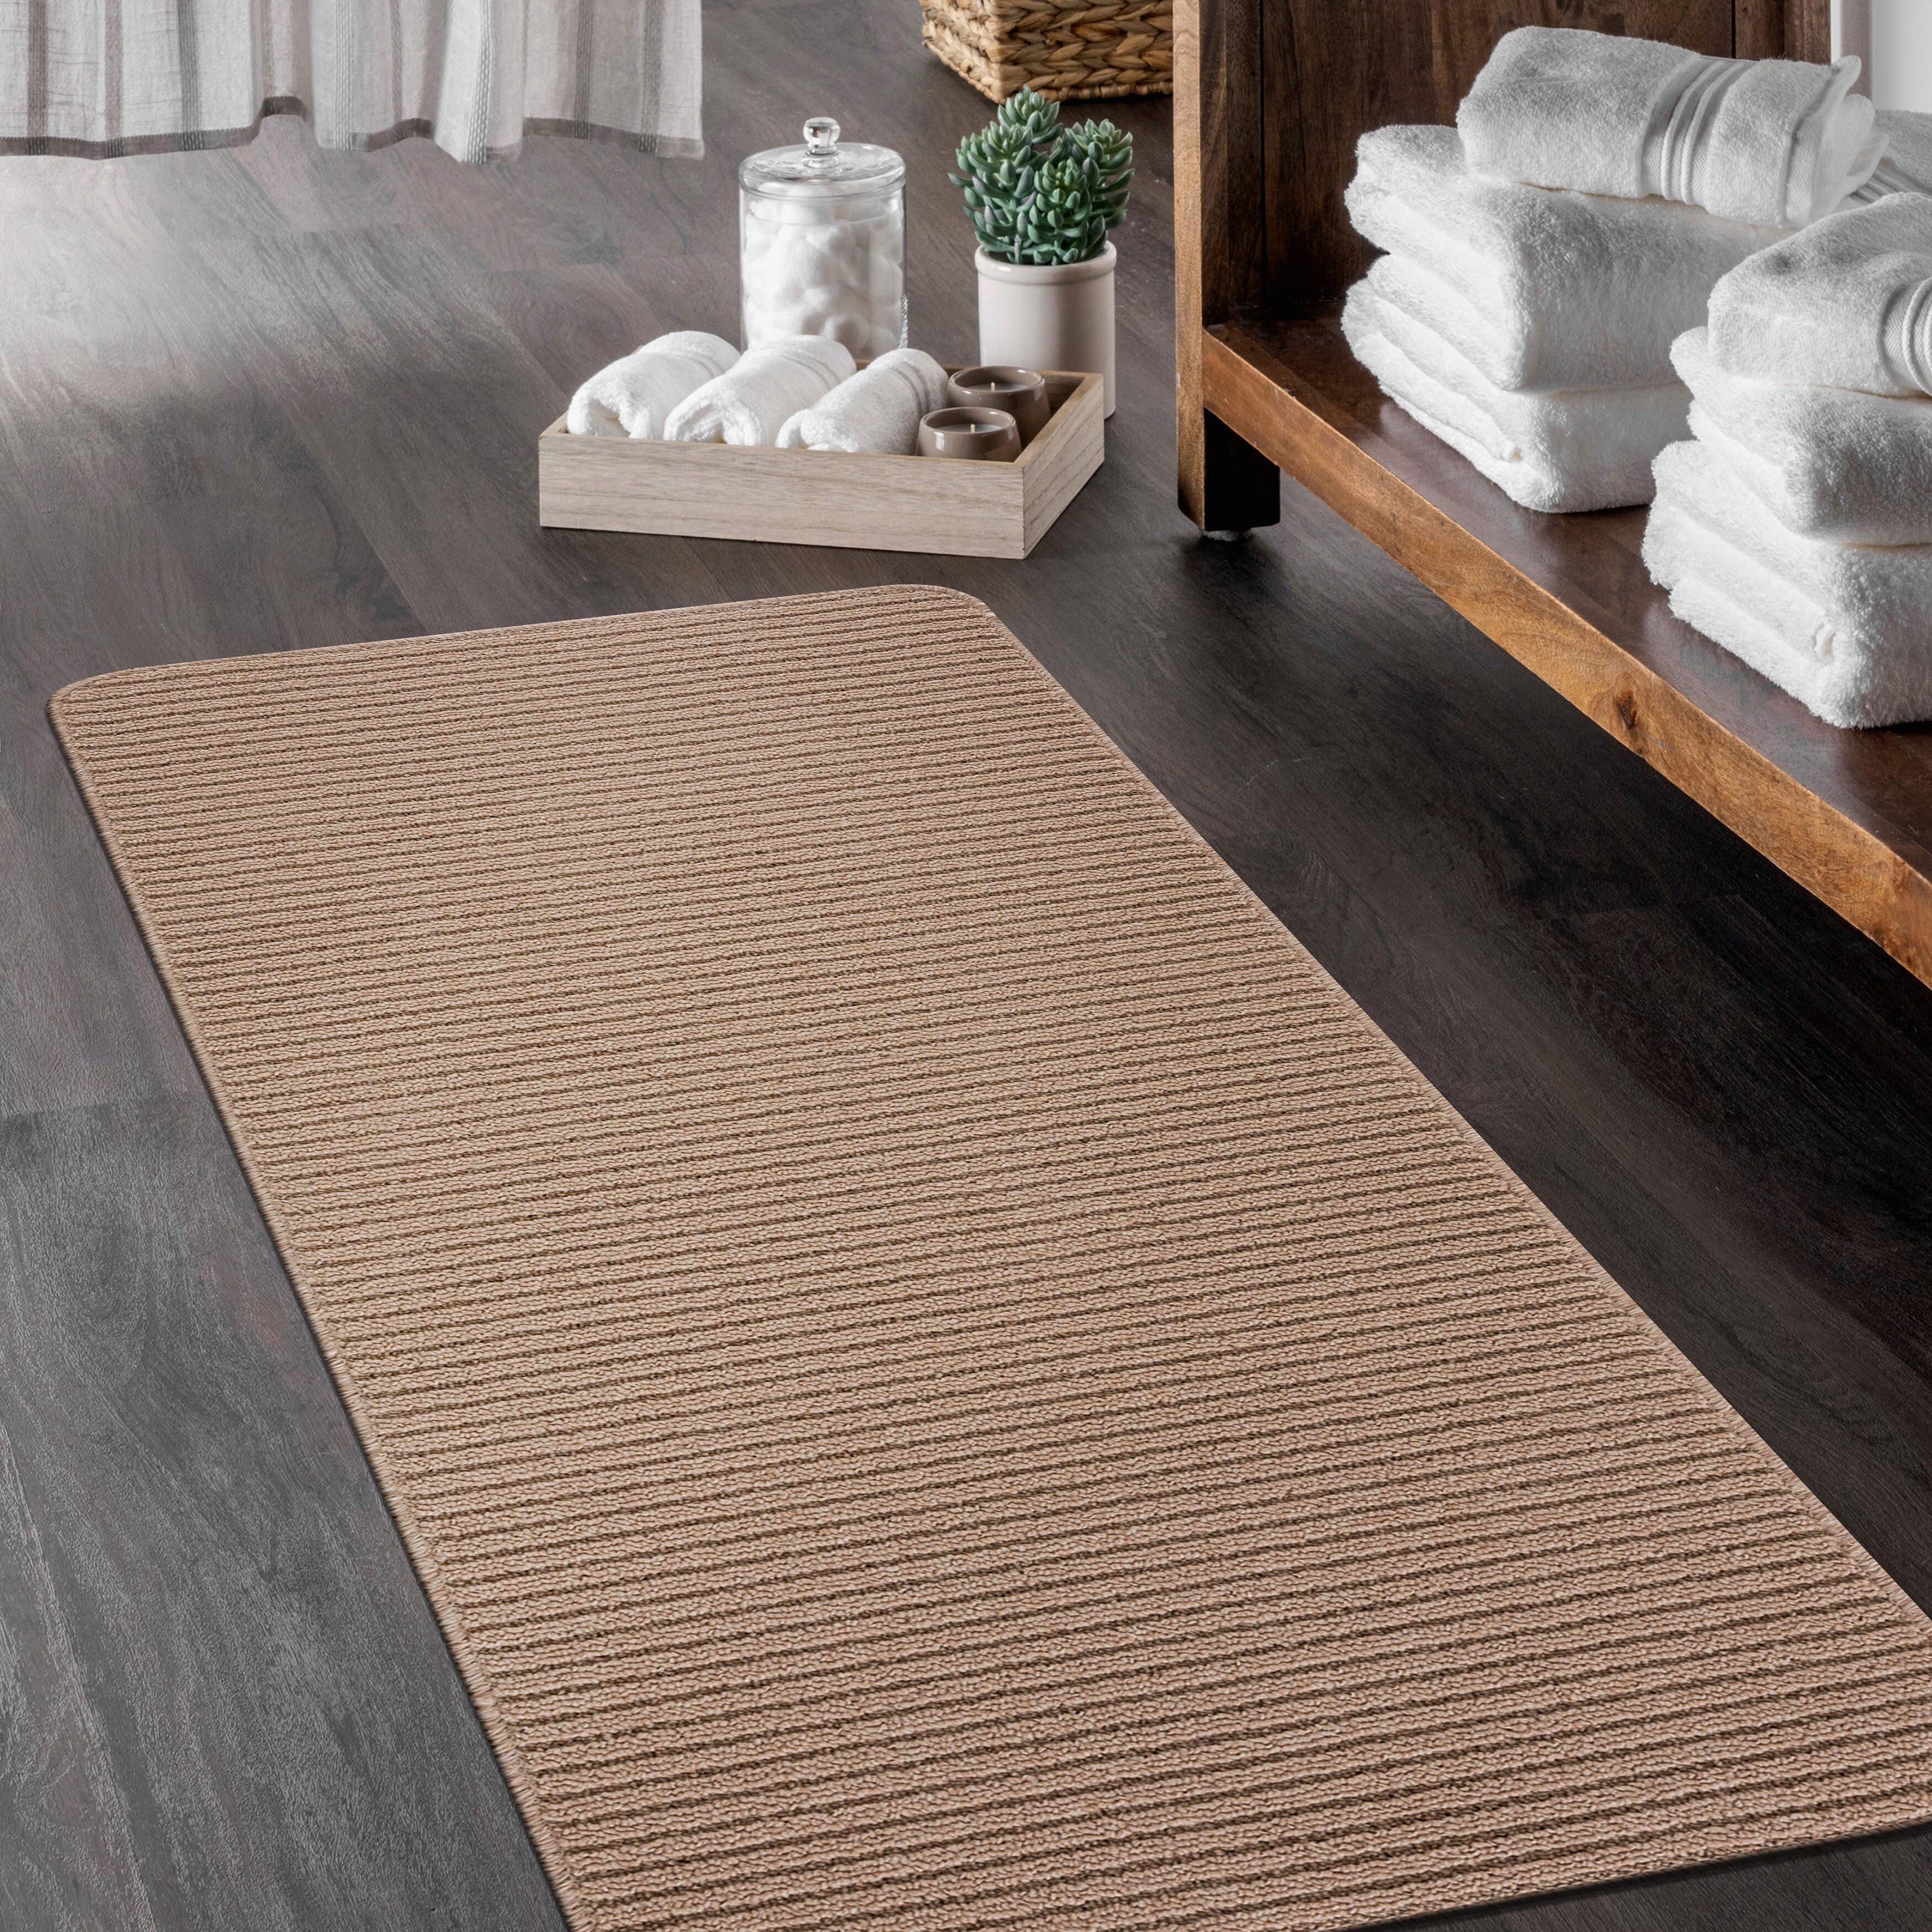 https://ak1.ostkcdn.com/images/products/is/images/direct/18c147e04f43888cedce11ac797ef0e34ae22590/Beverly-Rug-Non-Skid-Washable-Kitchen-Rugs-and-Kitchen-Mats%2C-Set-of-2%2C-20%22x48%22-%26-20%22x30%22.jpg